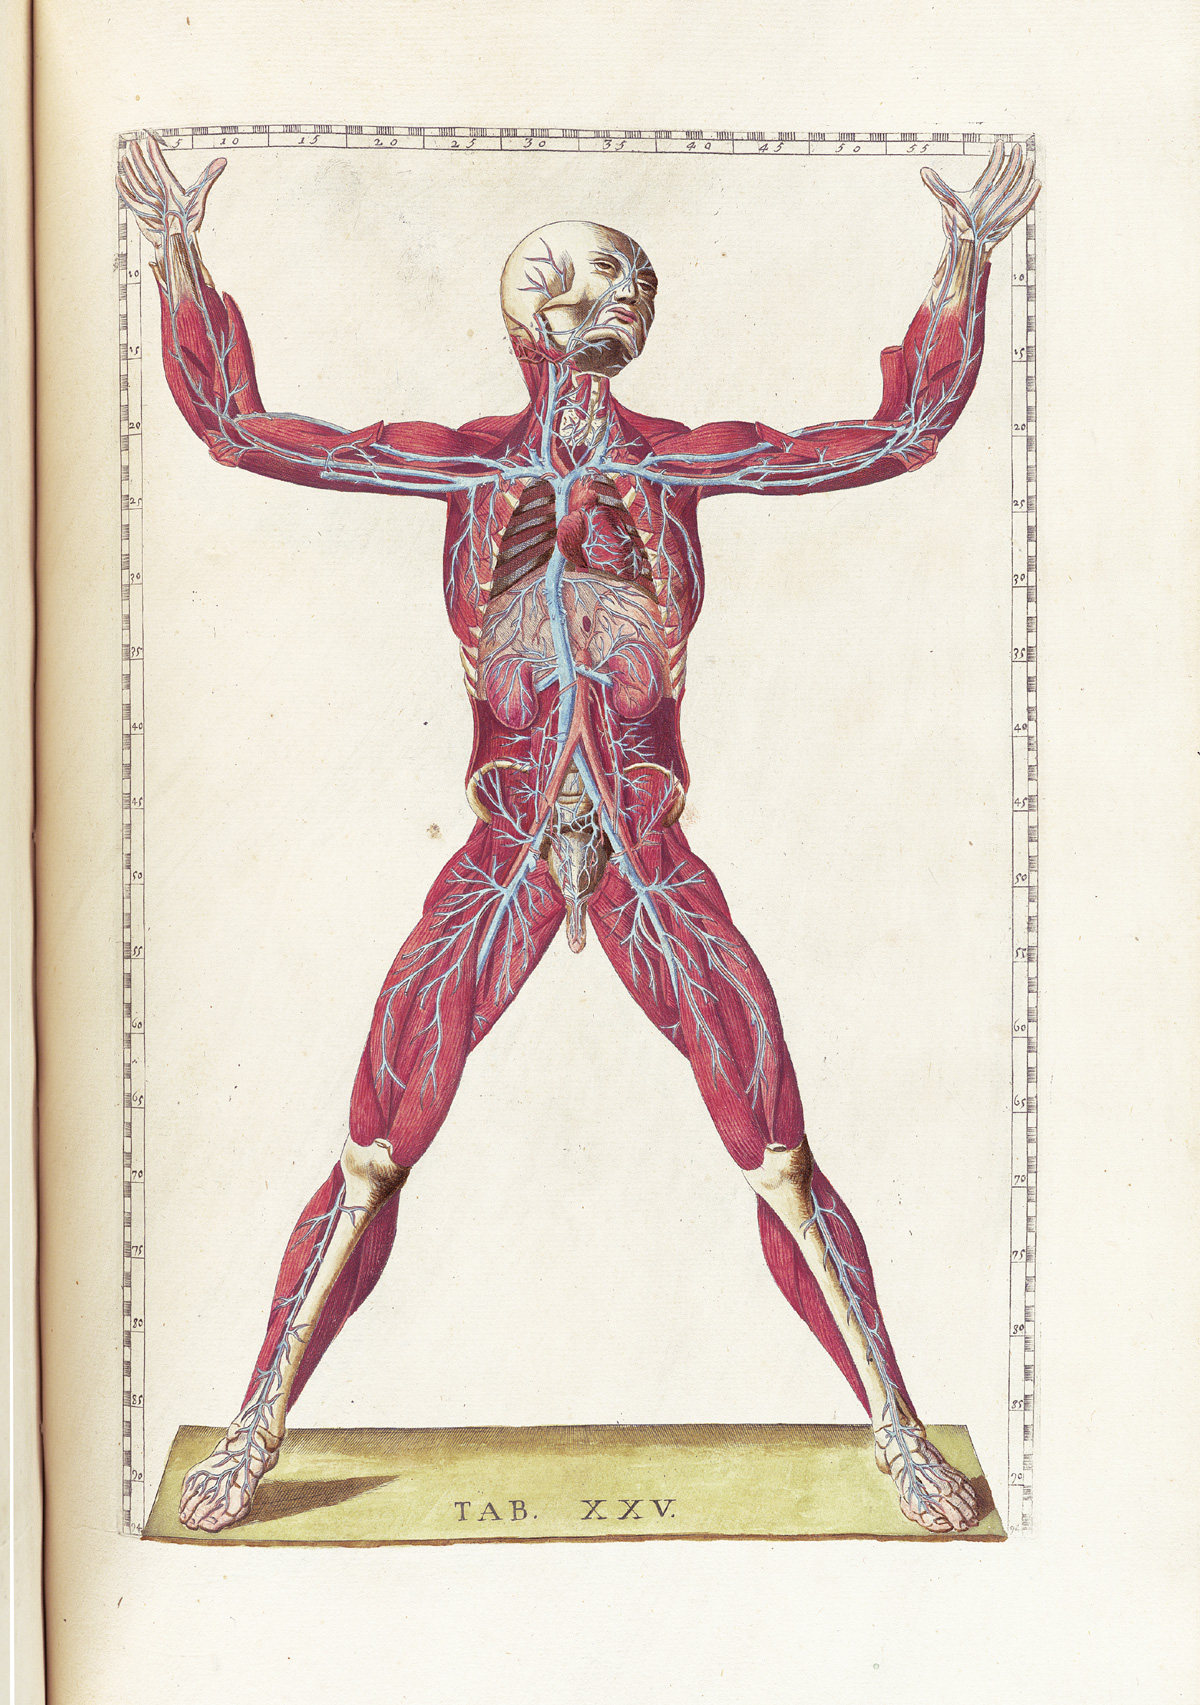 Hand-colored etching of a facing standing figure with flesh removed to expose the muscles and circulatory system including the heart, vena cava, renal circulatory system, and onto the limbs; with emphasis on the veins as opposed to the arteries; the figure is looking upward and to the right with both arms raised, almost as if doing a jumping jack; from Bartholomeo Eustachi’s Tabulae anatomicae, NLM Call no.: WZ 260 E87t 1783.